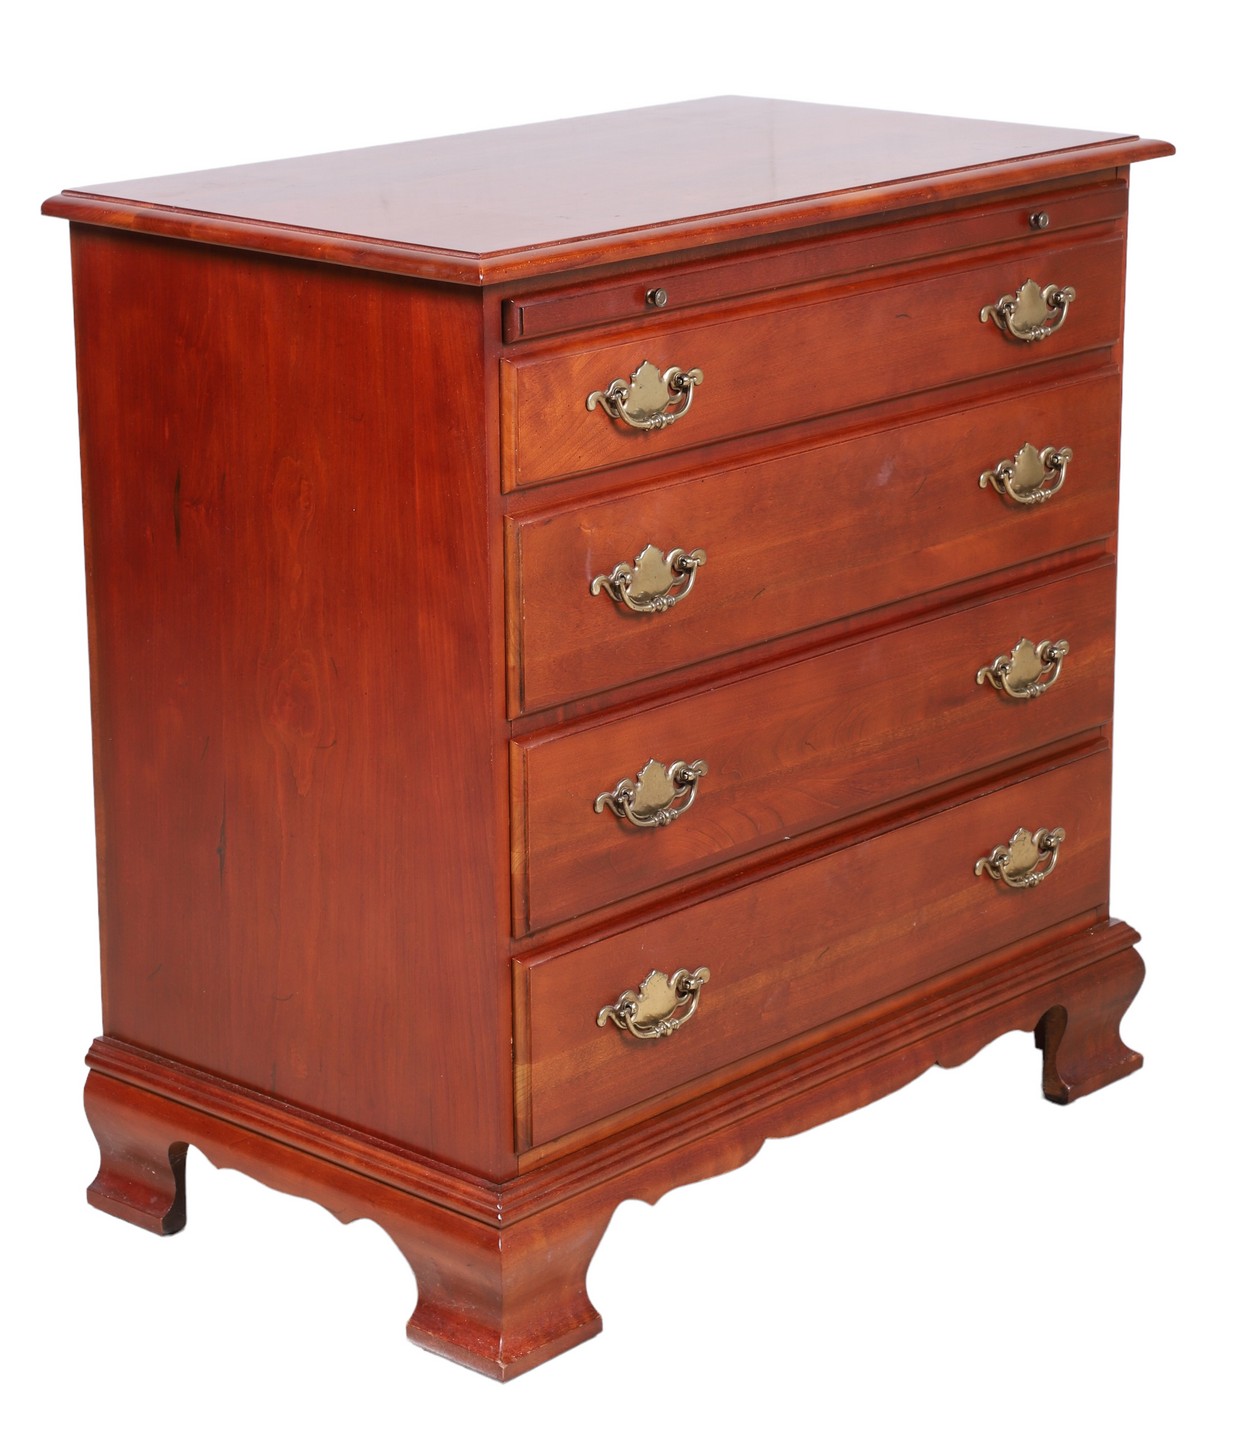 Mahogany bachelors chest, pull out